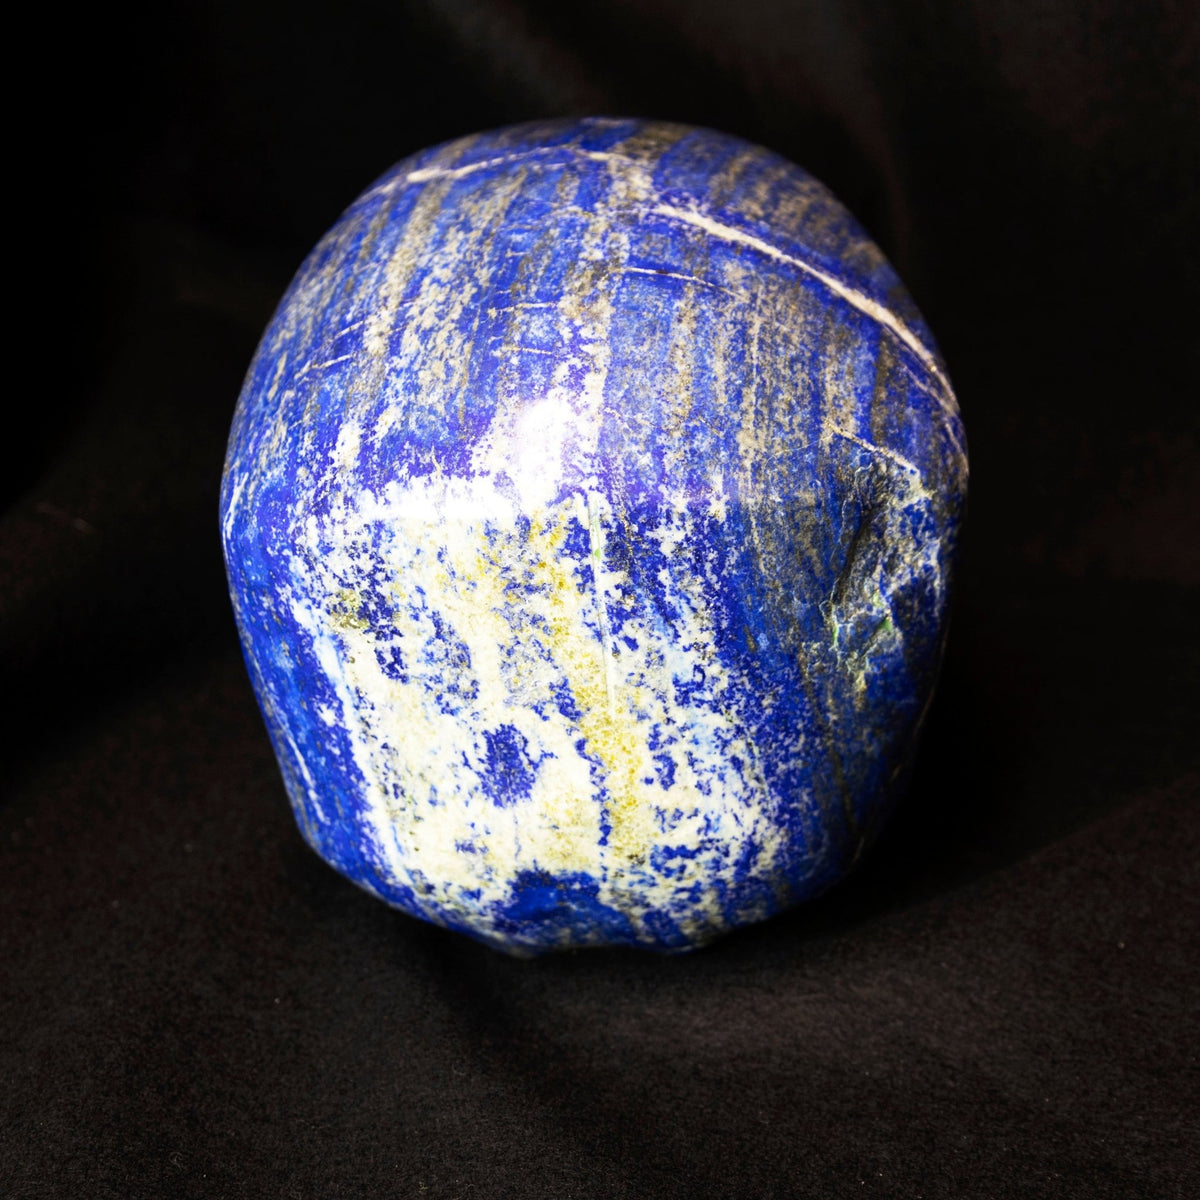 Lapis Skull 9 Inch Carving - Park City Jewelers